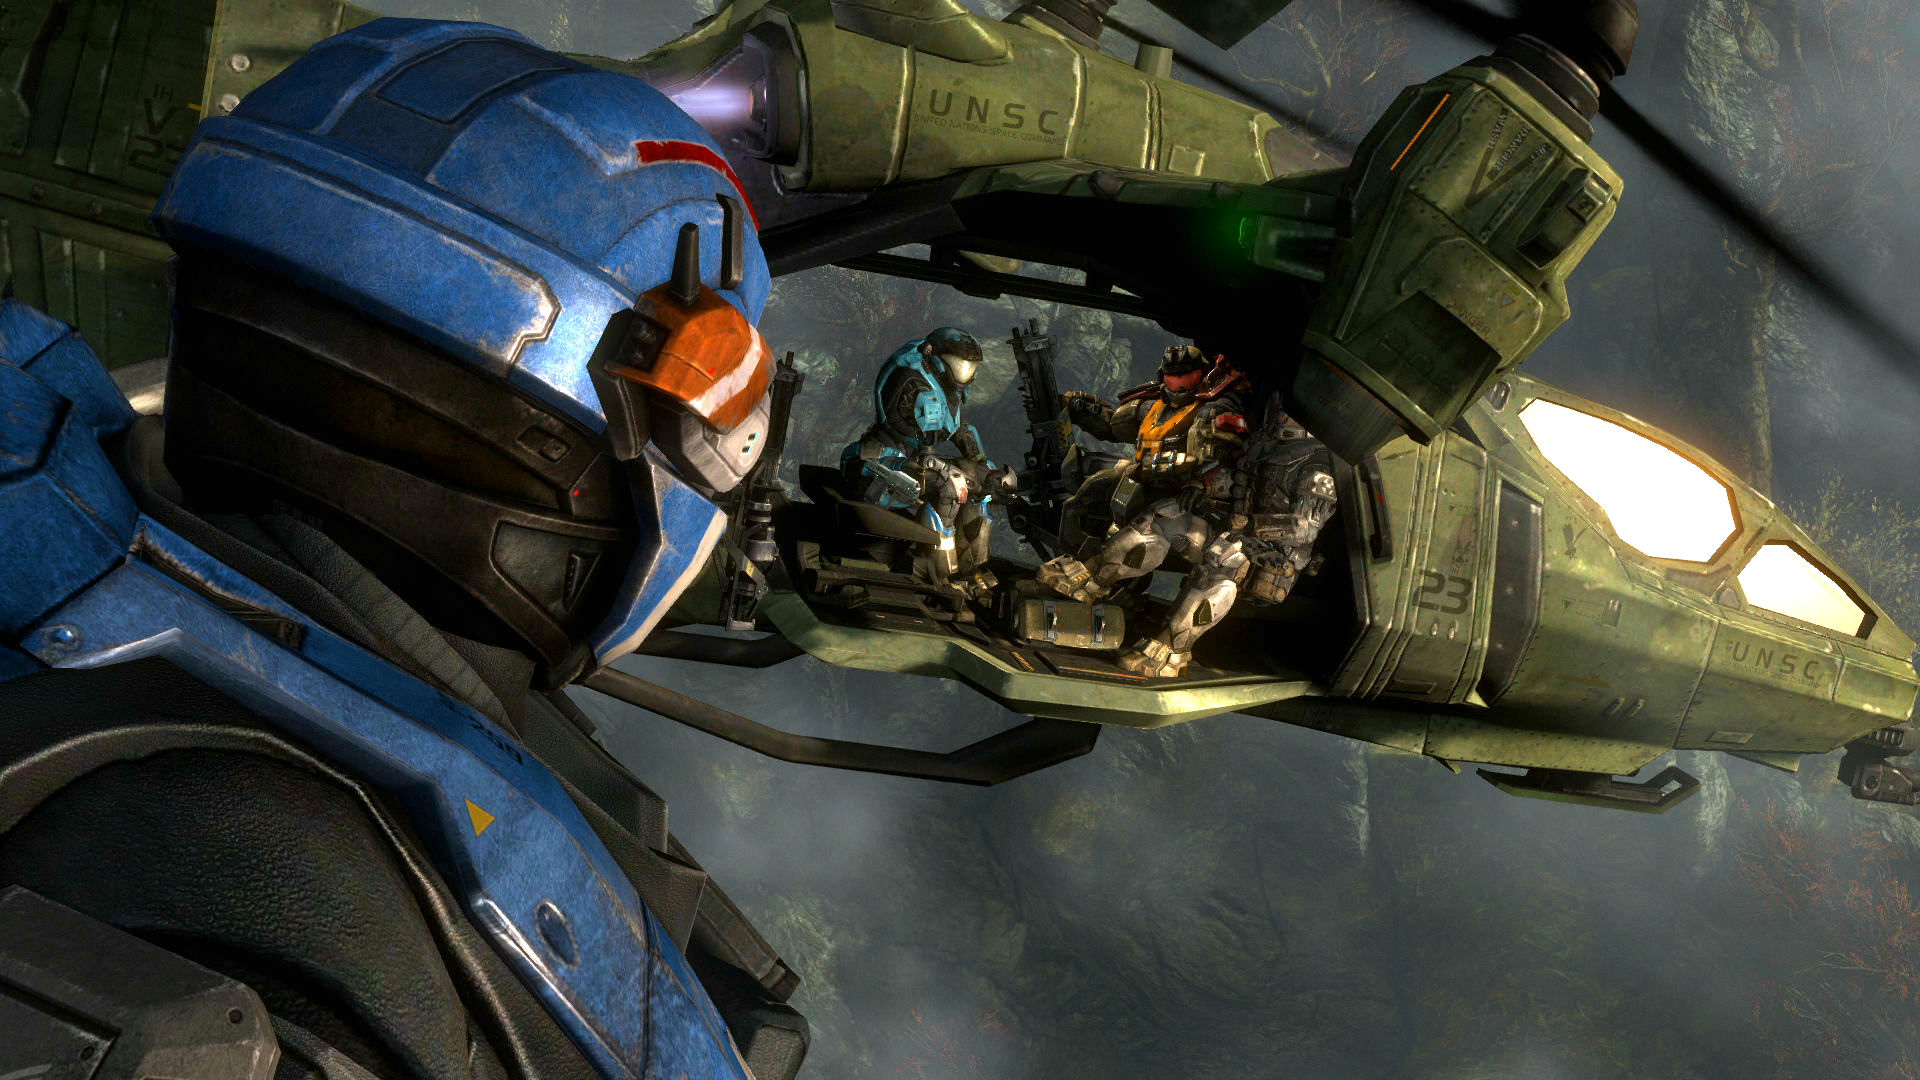 Guide for Halo: The Master Chief Collection - Halo: Reach